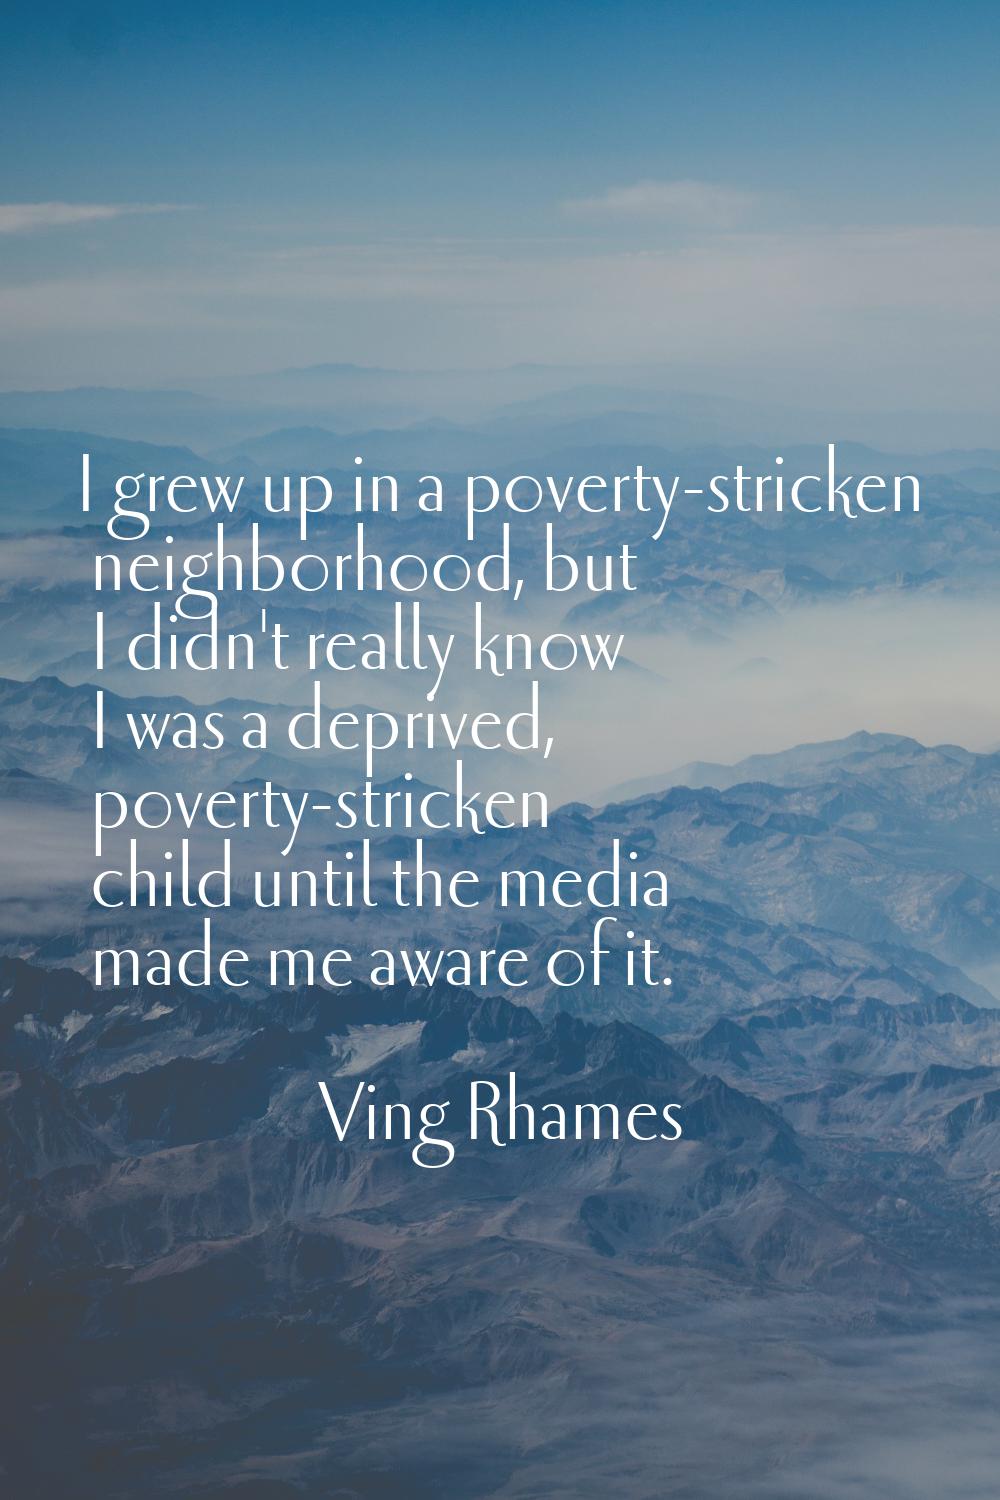 I grew up in a poverty-stricken neighborhood, but I didn't really know I was a deprived, poverty-st